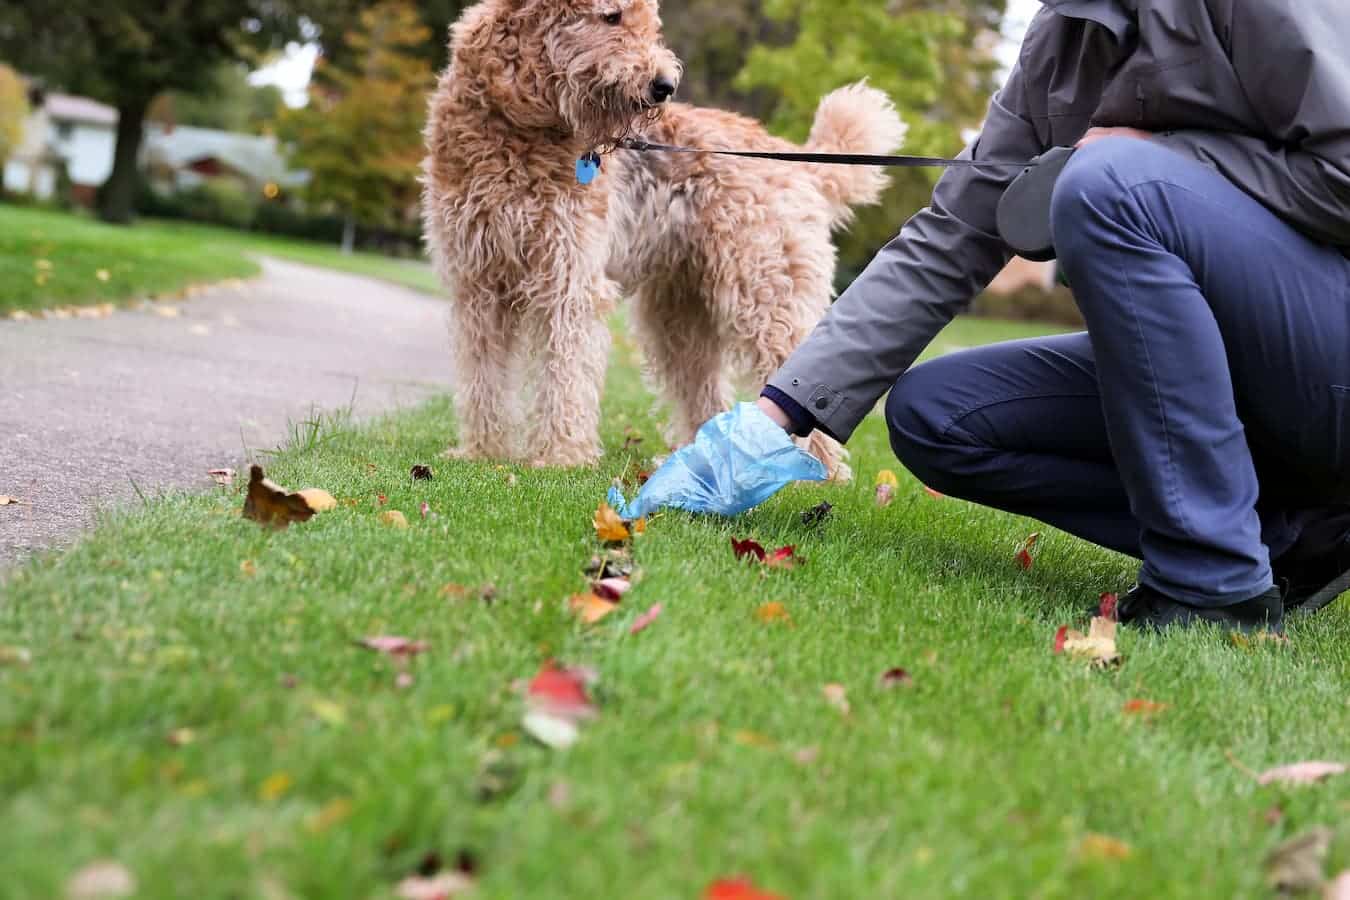 someone picking up dog poop life threatening adult dogs dog experiencing diarrhea poisons viral infections dogs suffering spoiled food ingestion adult dog has diarrhea dog foods dog's diarrhea requires dog's upset tummy health concerns